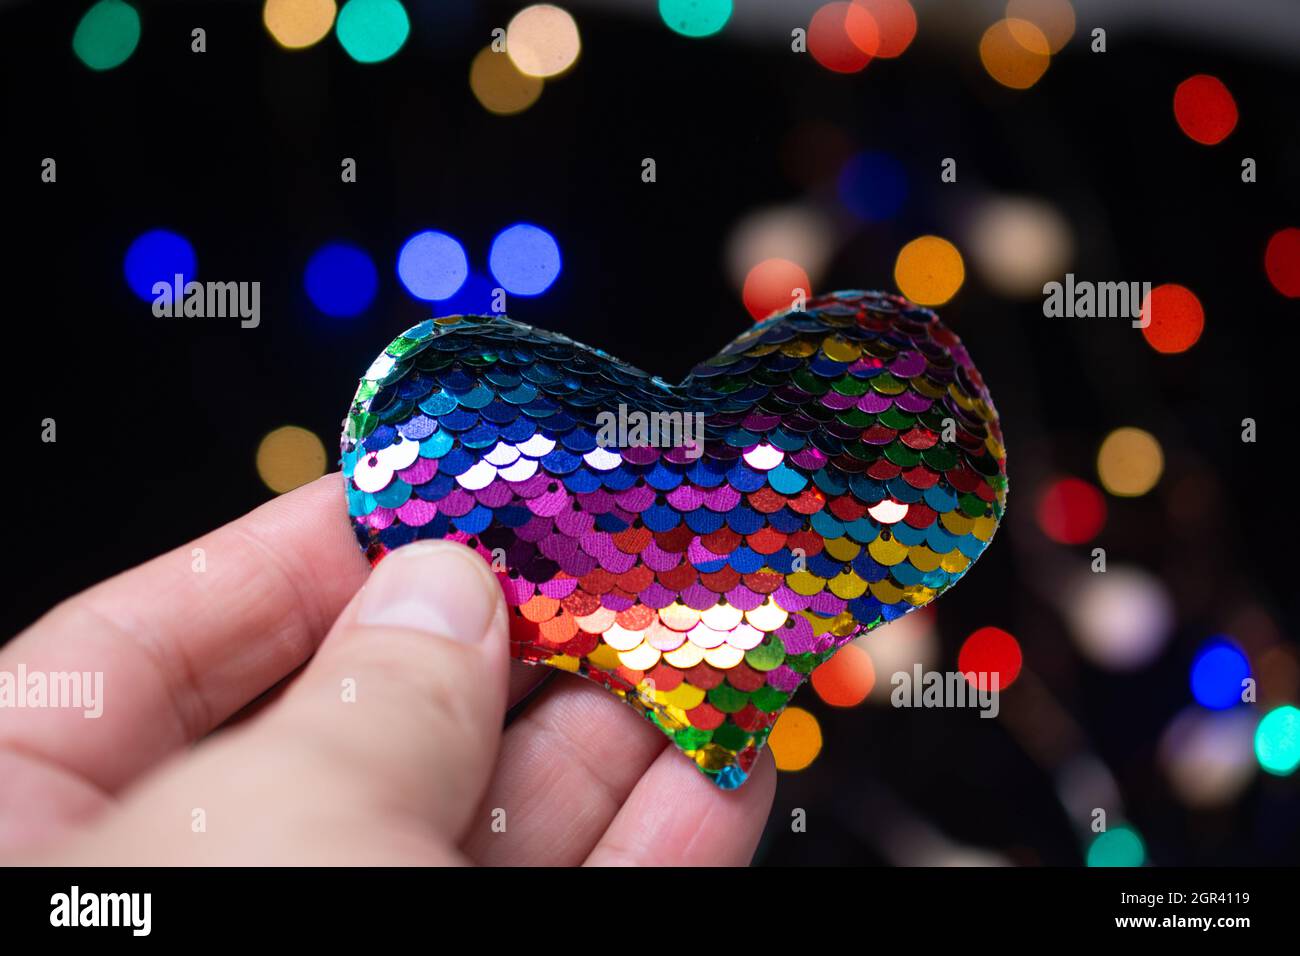 Close-up Of Hand Holding Heart Shape Decoration Against Blurred Background Stock Photo